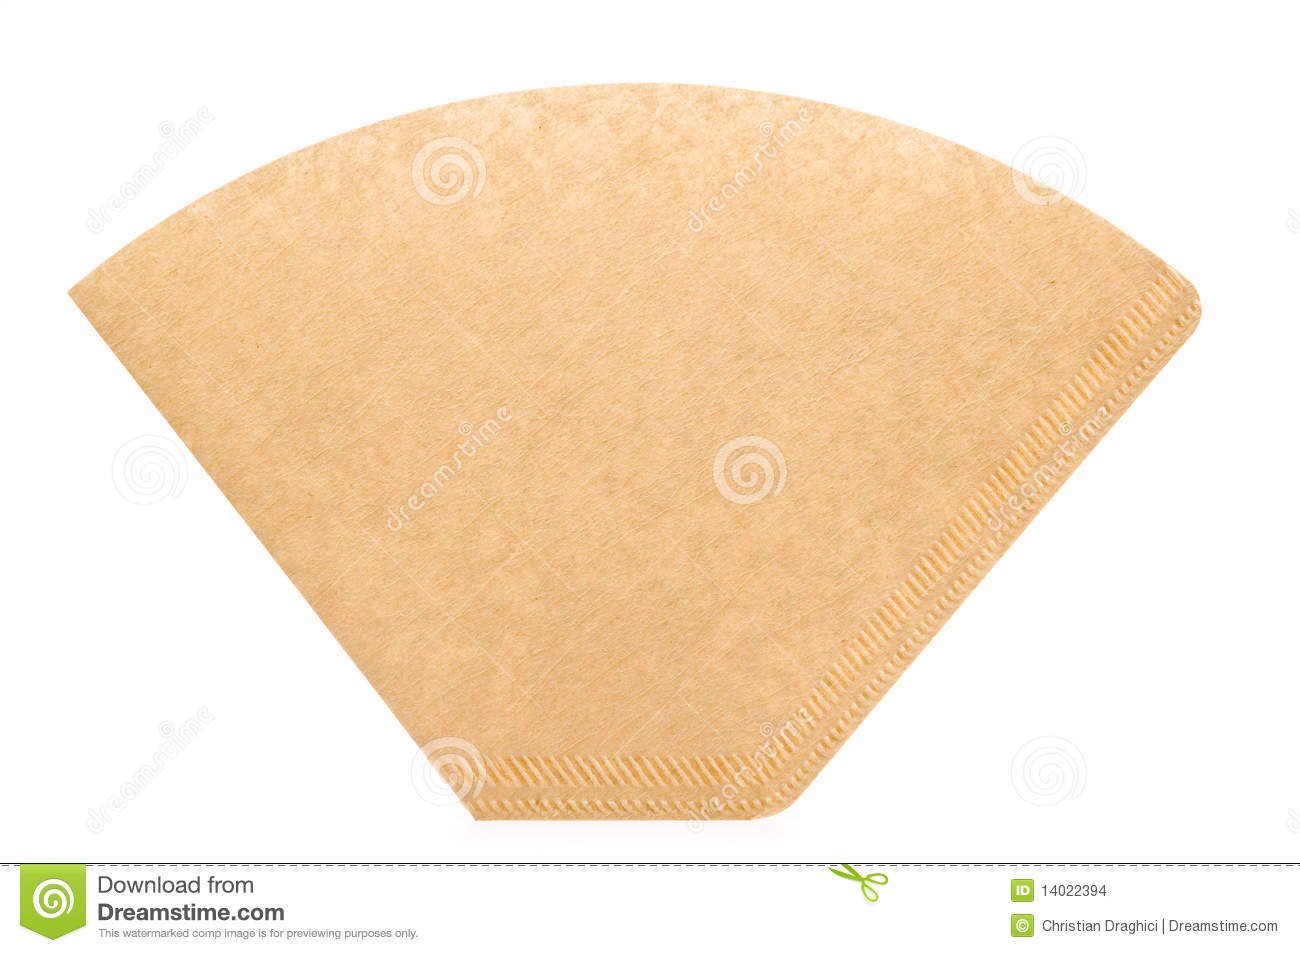 Coffee Filter Stock Images   Image  14022394